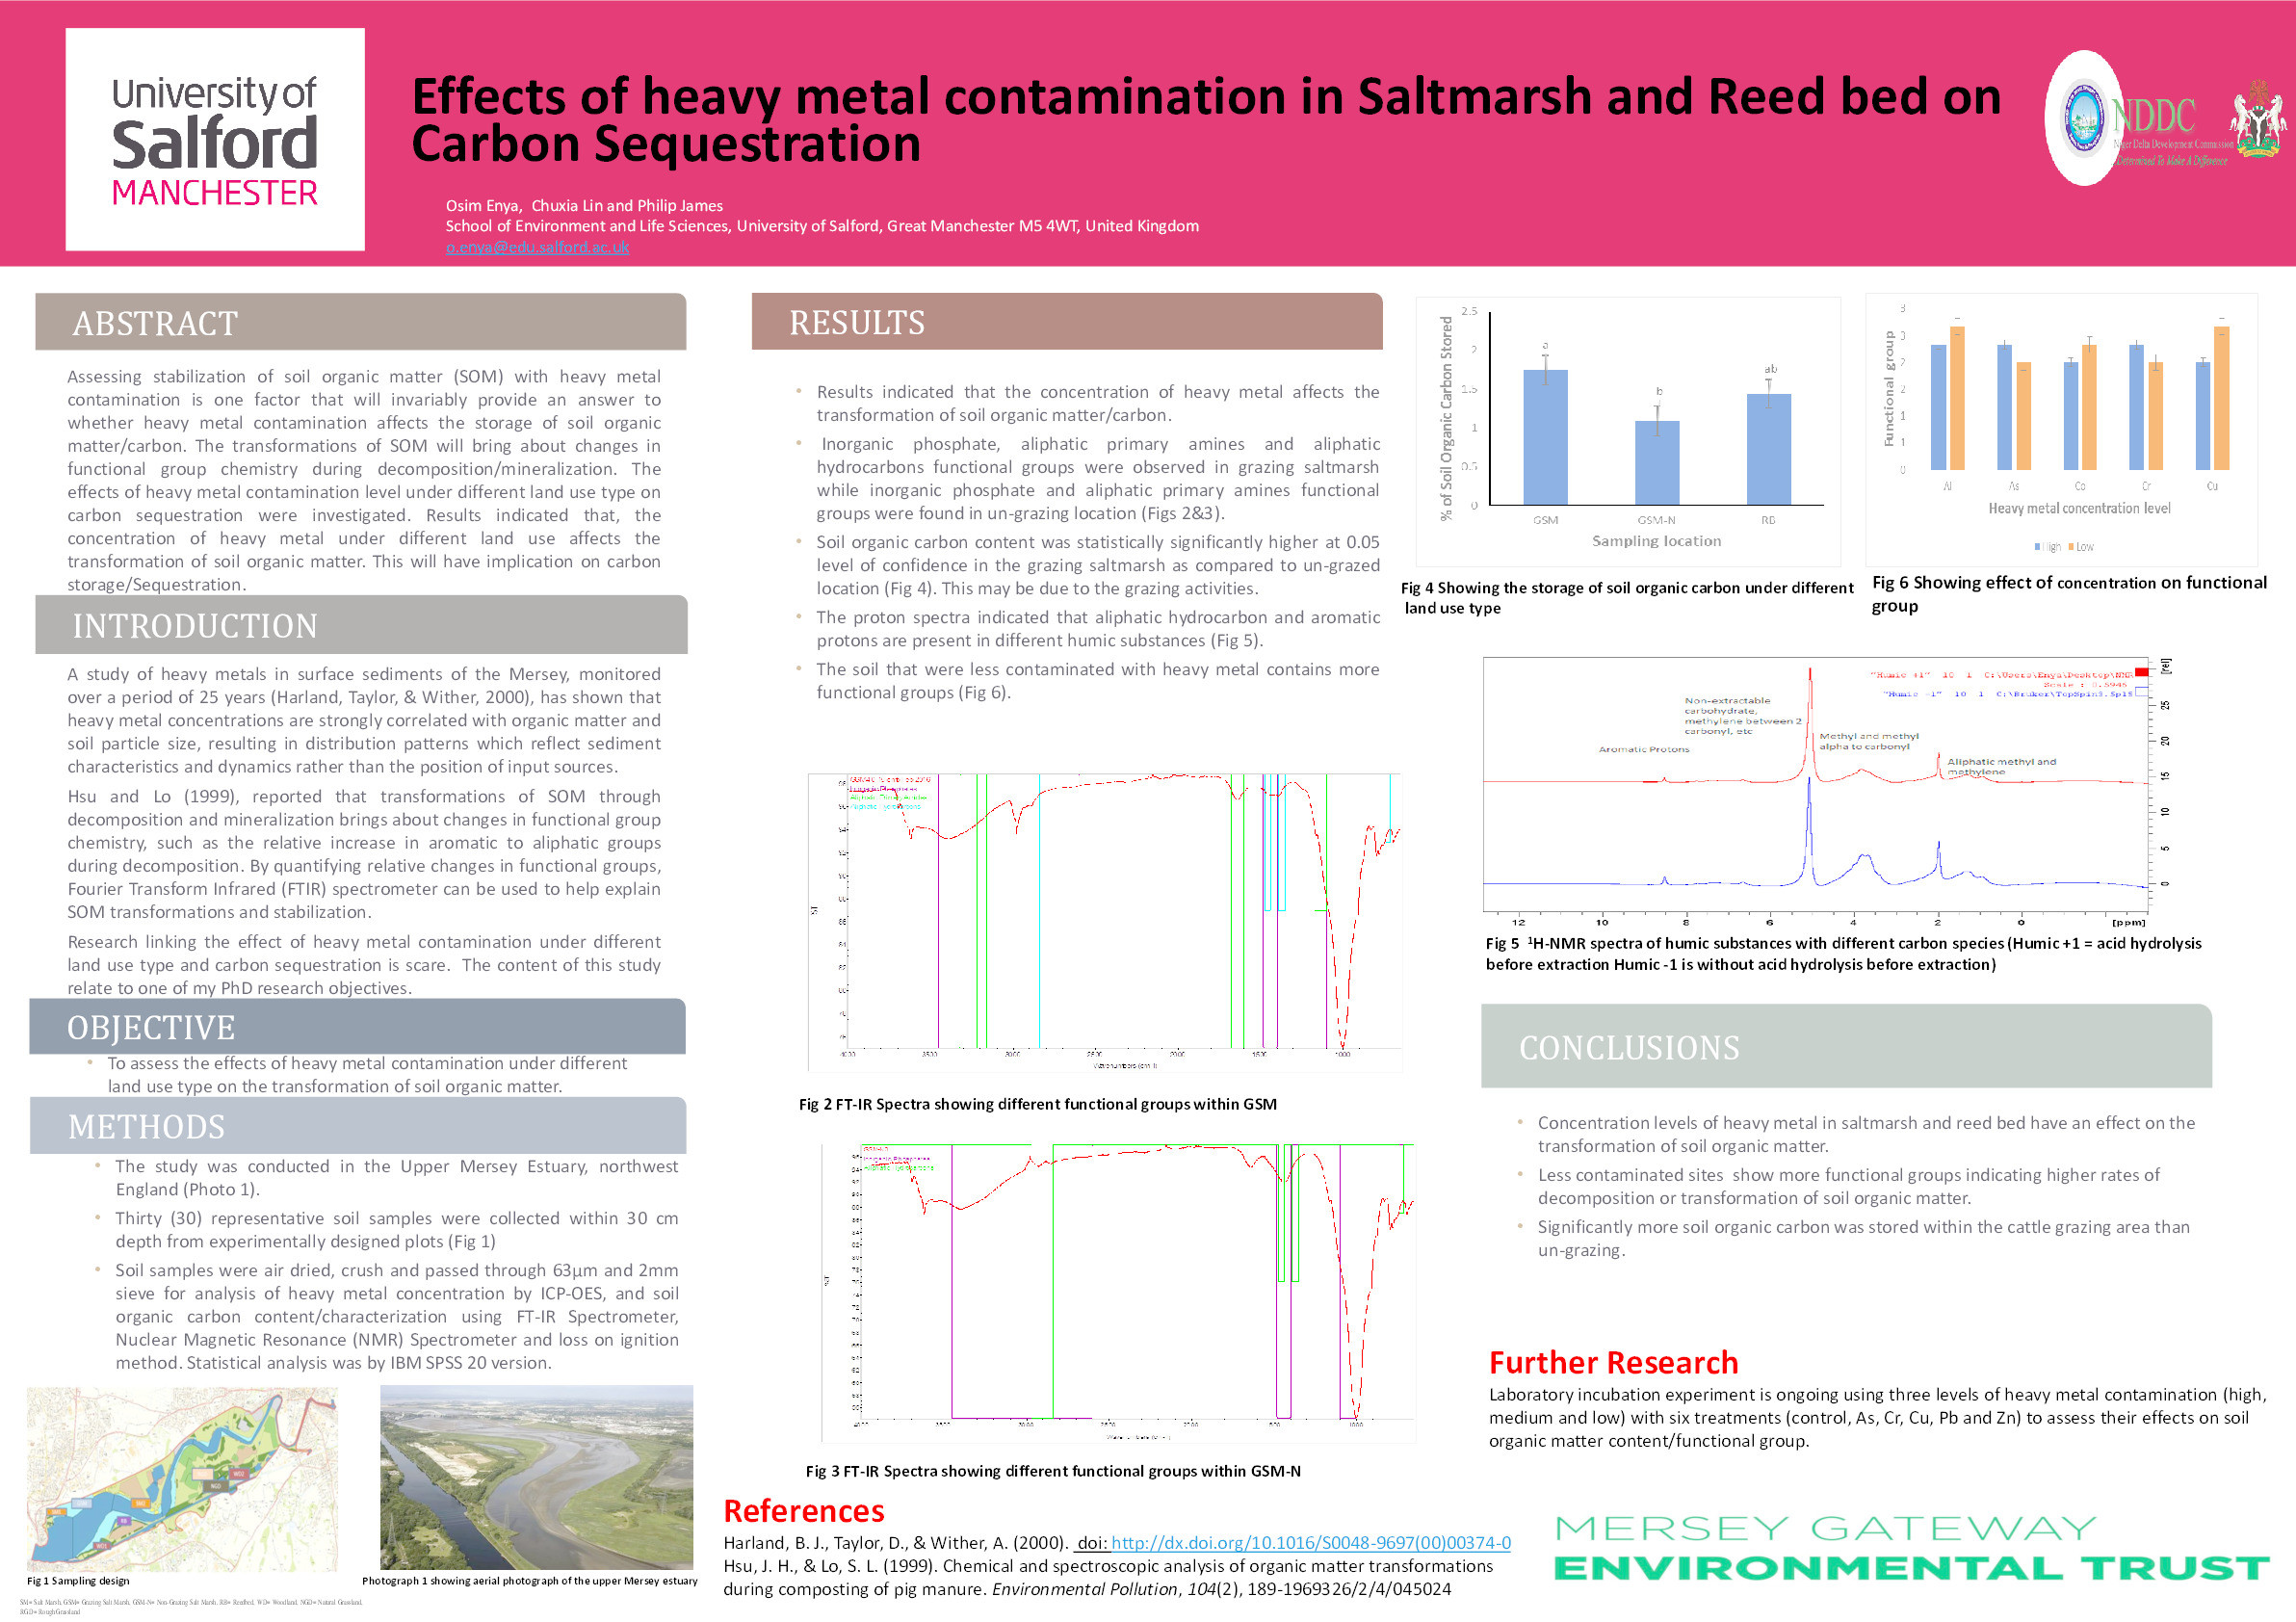 Effects of heavy metal contamination in saltmarsh and reed bed on carbon sequestration Thumbnail